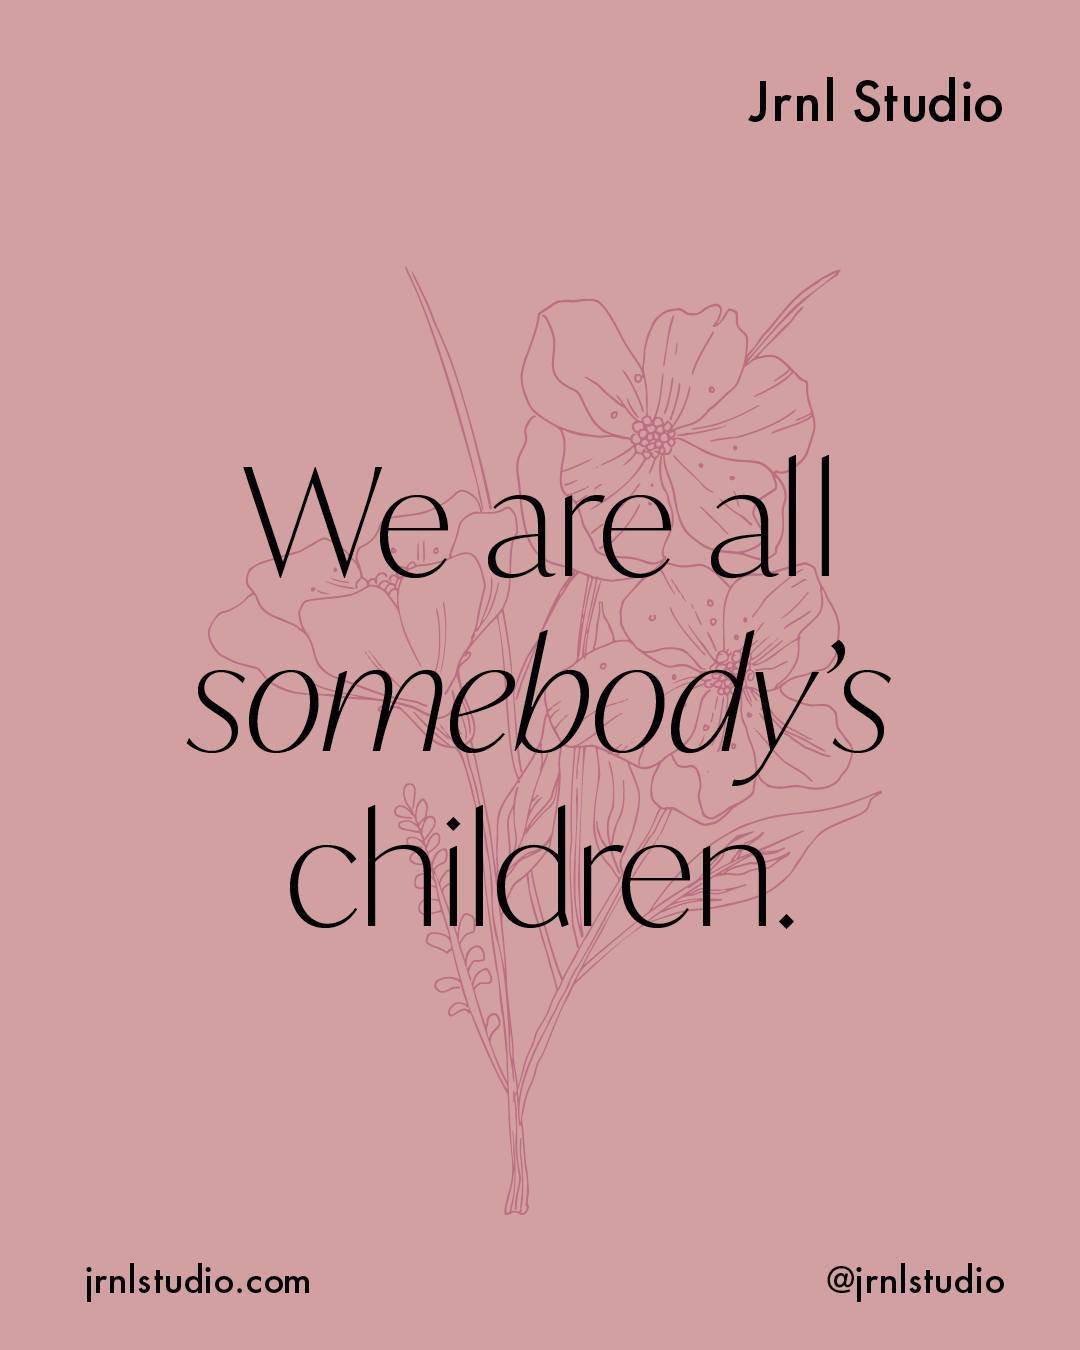 Yes we are! Happy Mother's Day! ⁠
⁠
#happymothersday #mothersday ⁠